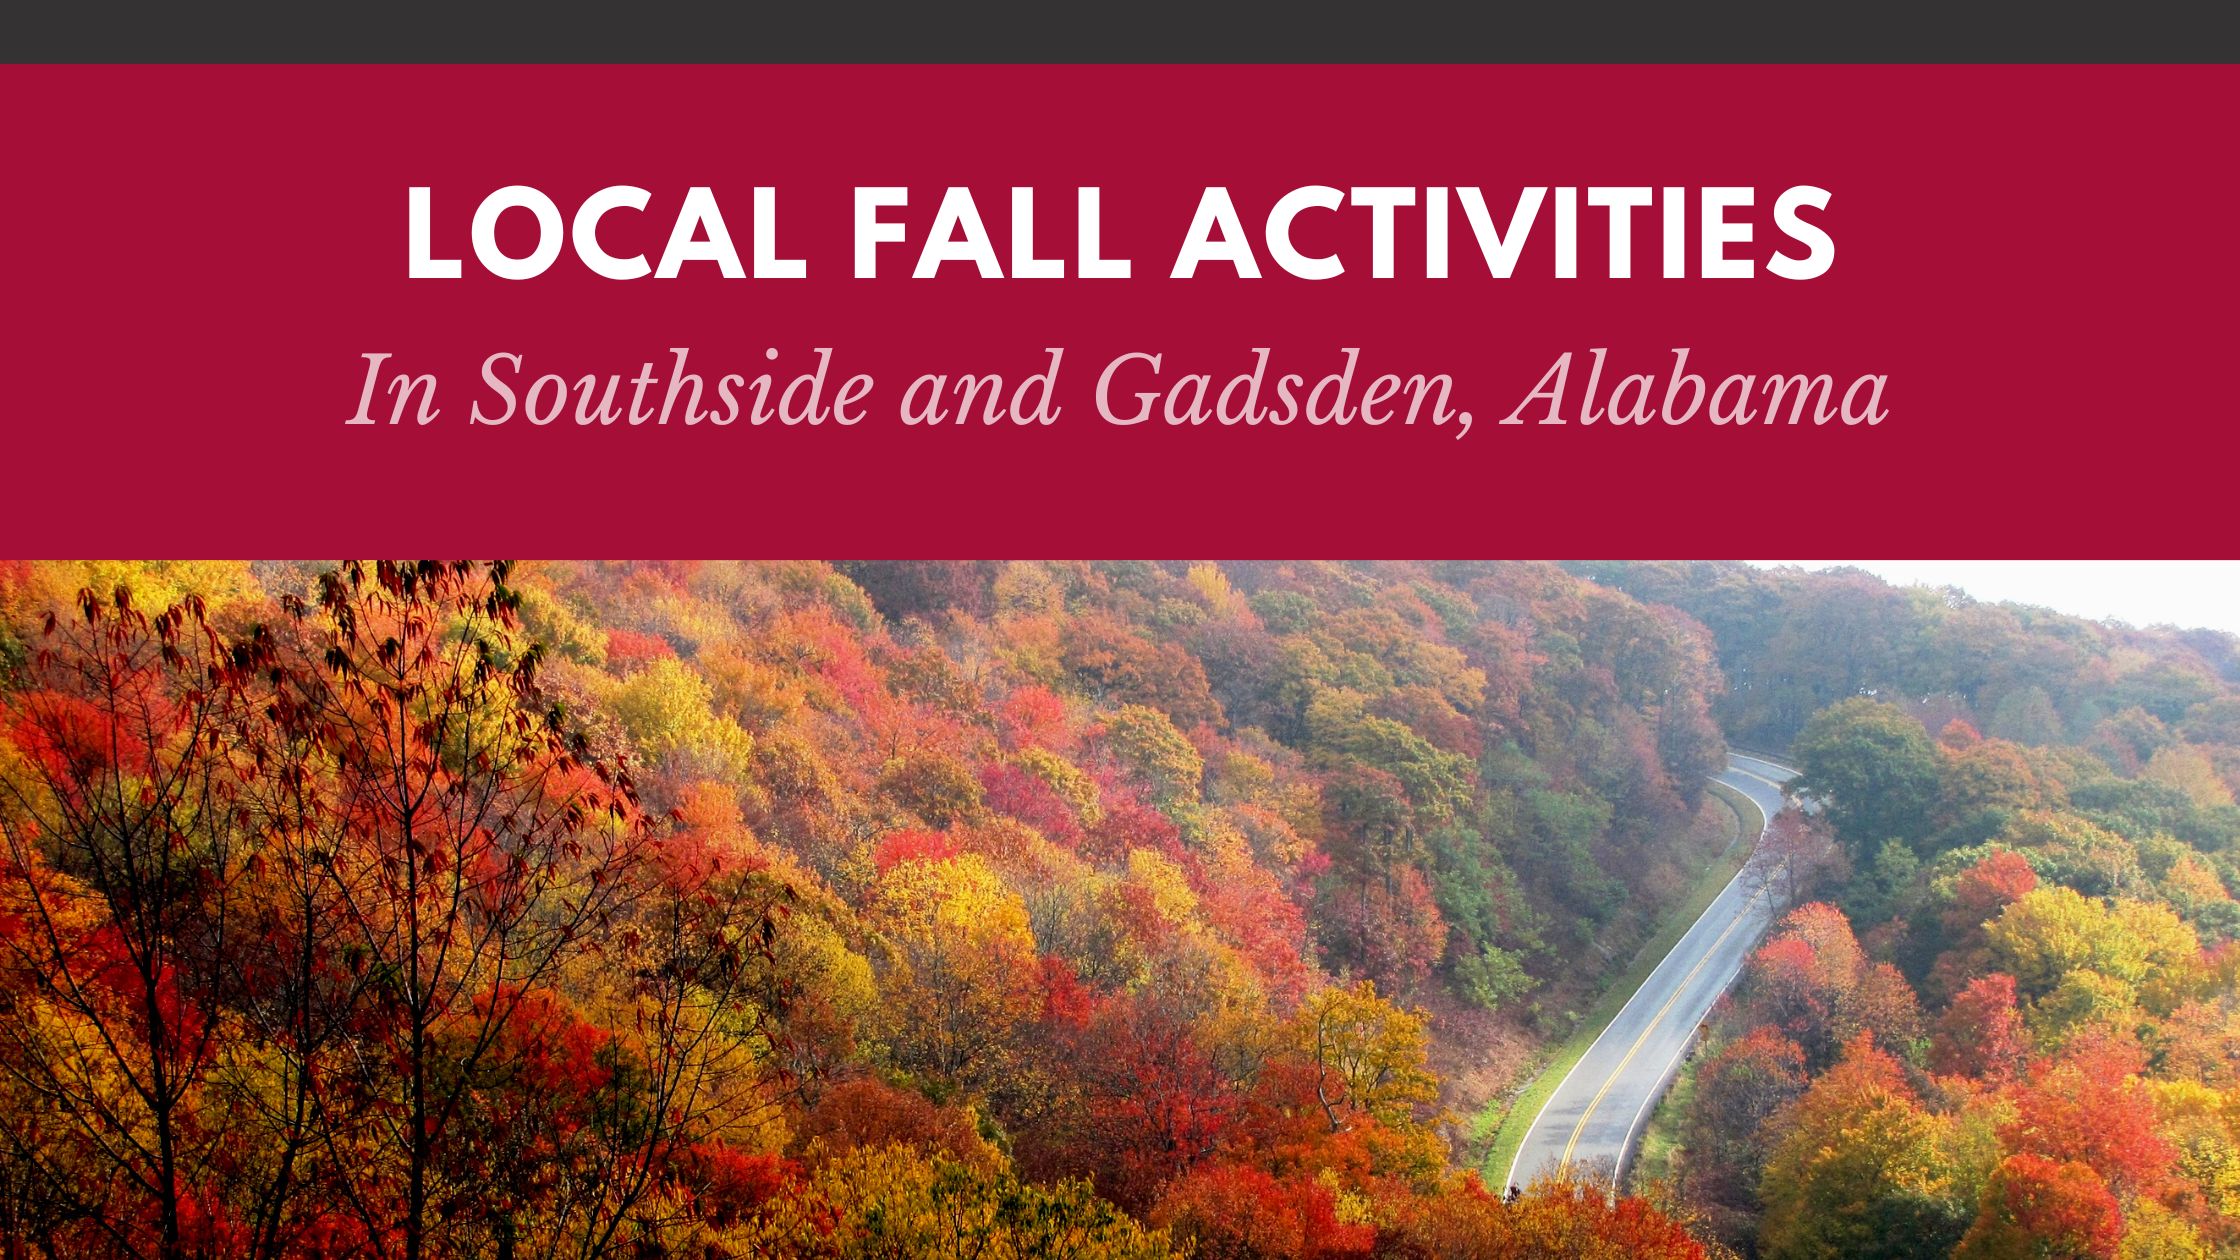 Local Fall Activities in Southside and Gadsden, Alabama